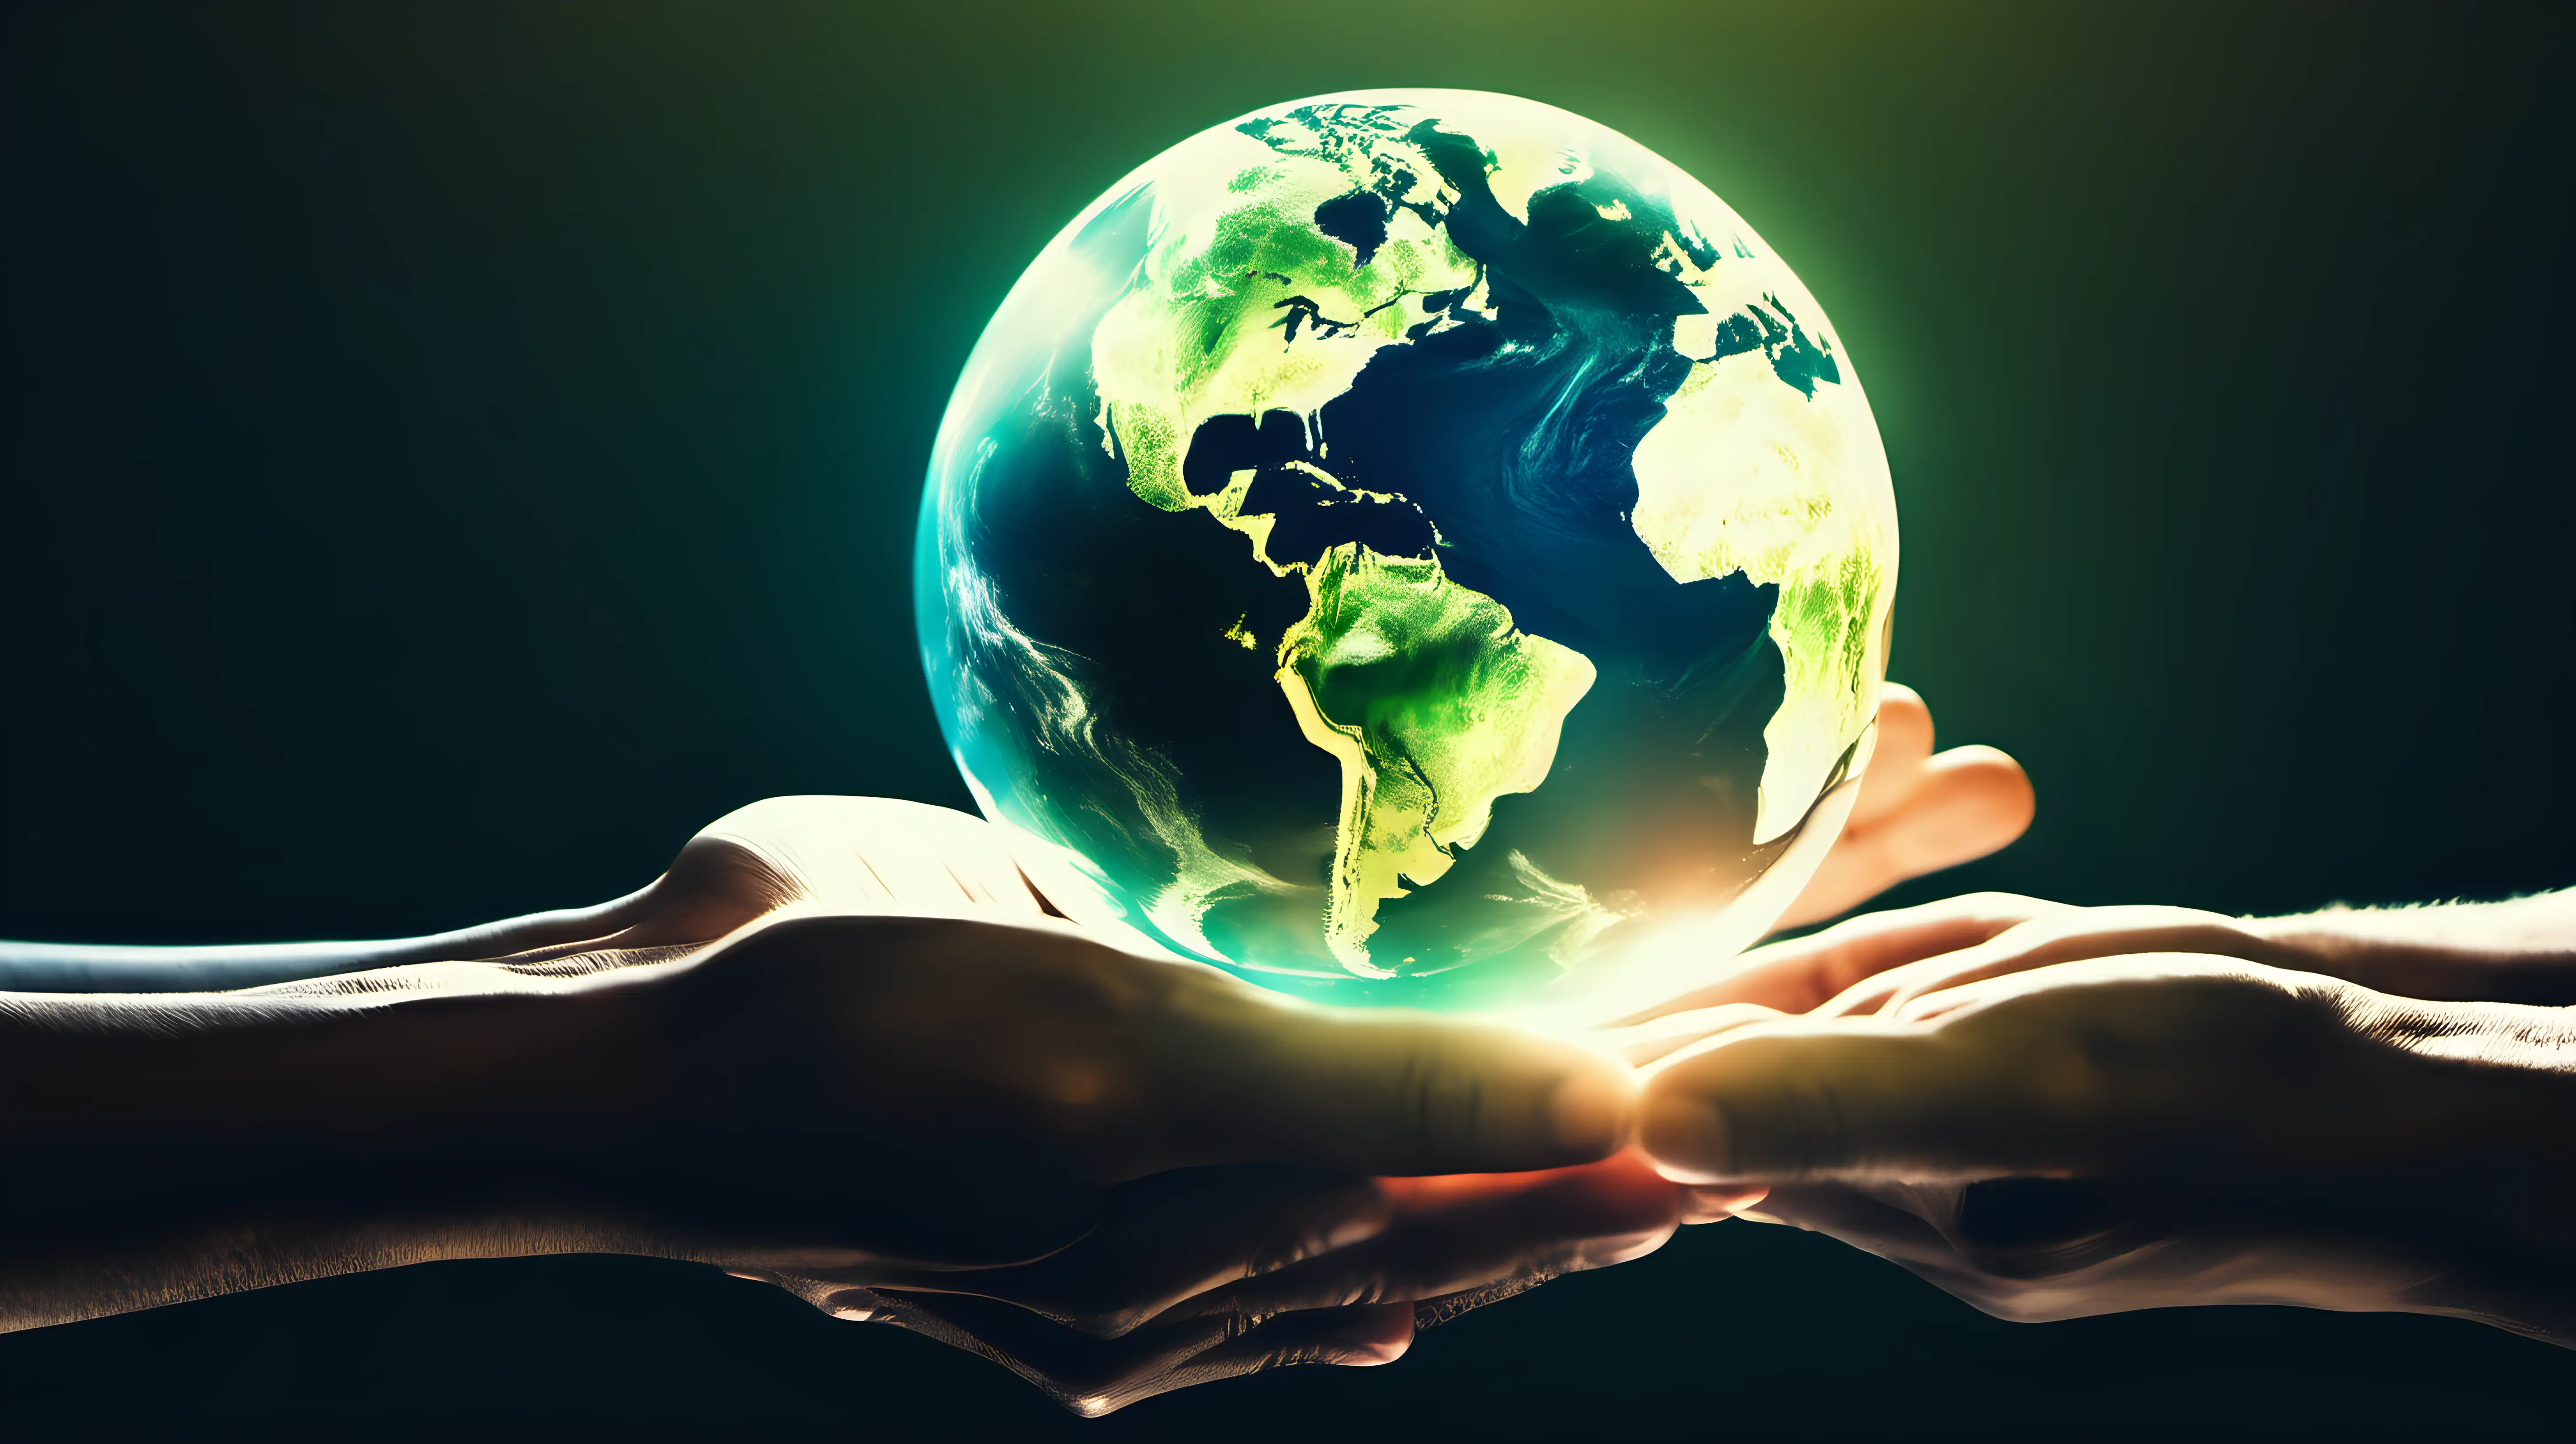 Hands reaching out to support a luminous Earth sphere, emphasizing care for the planet and its regions.